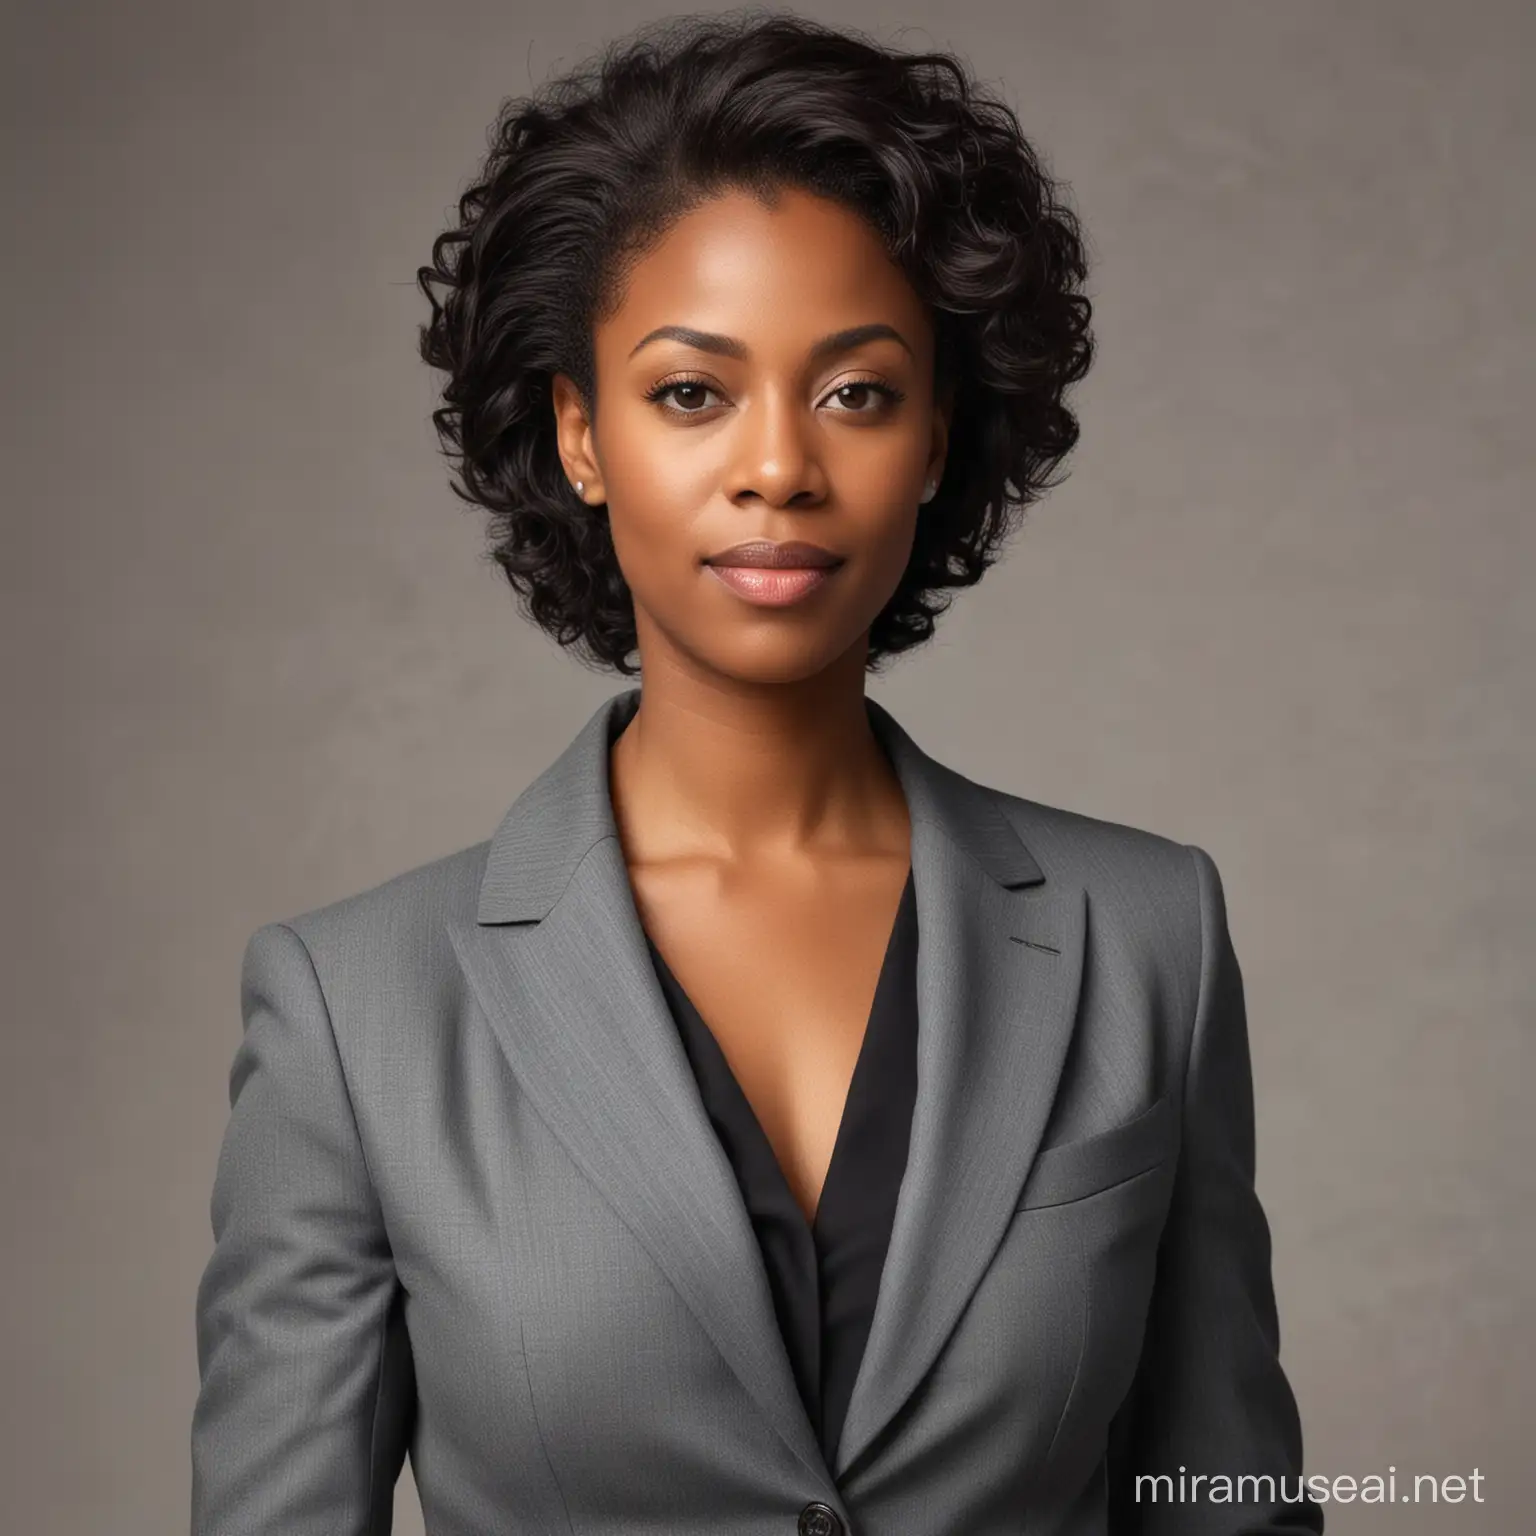 picture of a black female  in a suit who is in her 40s